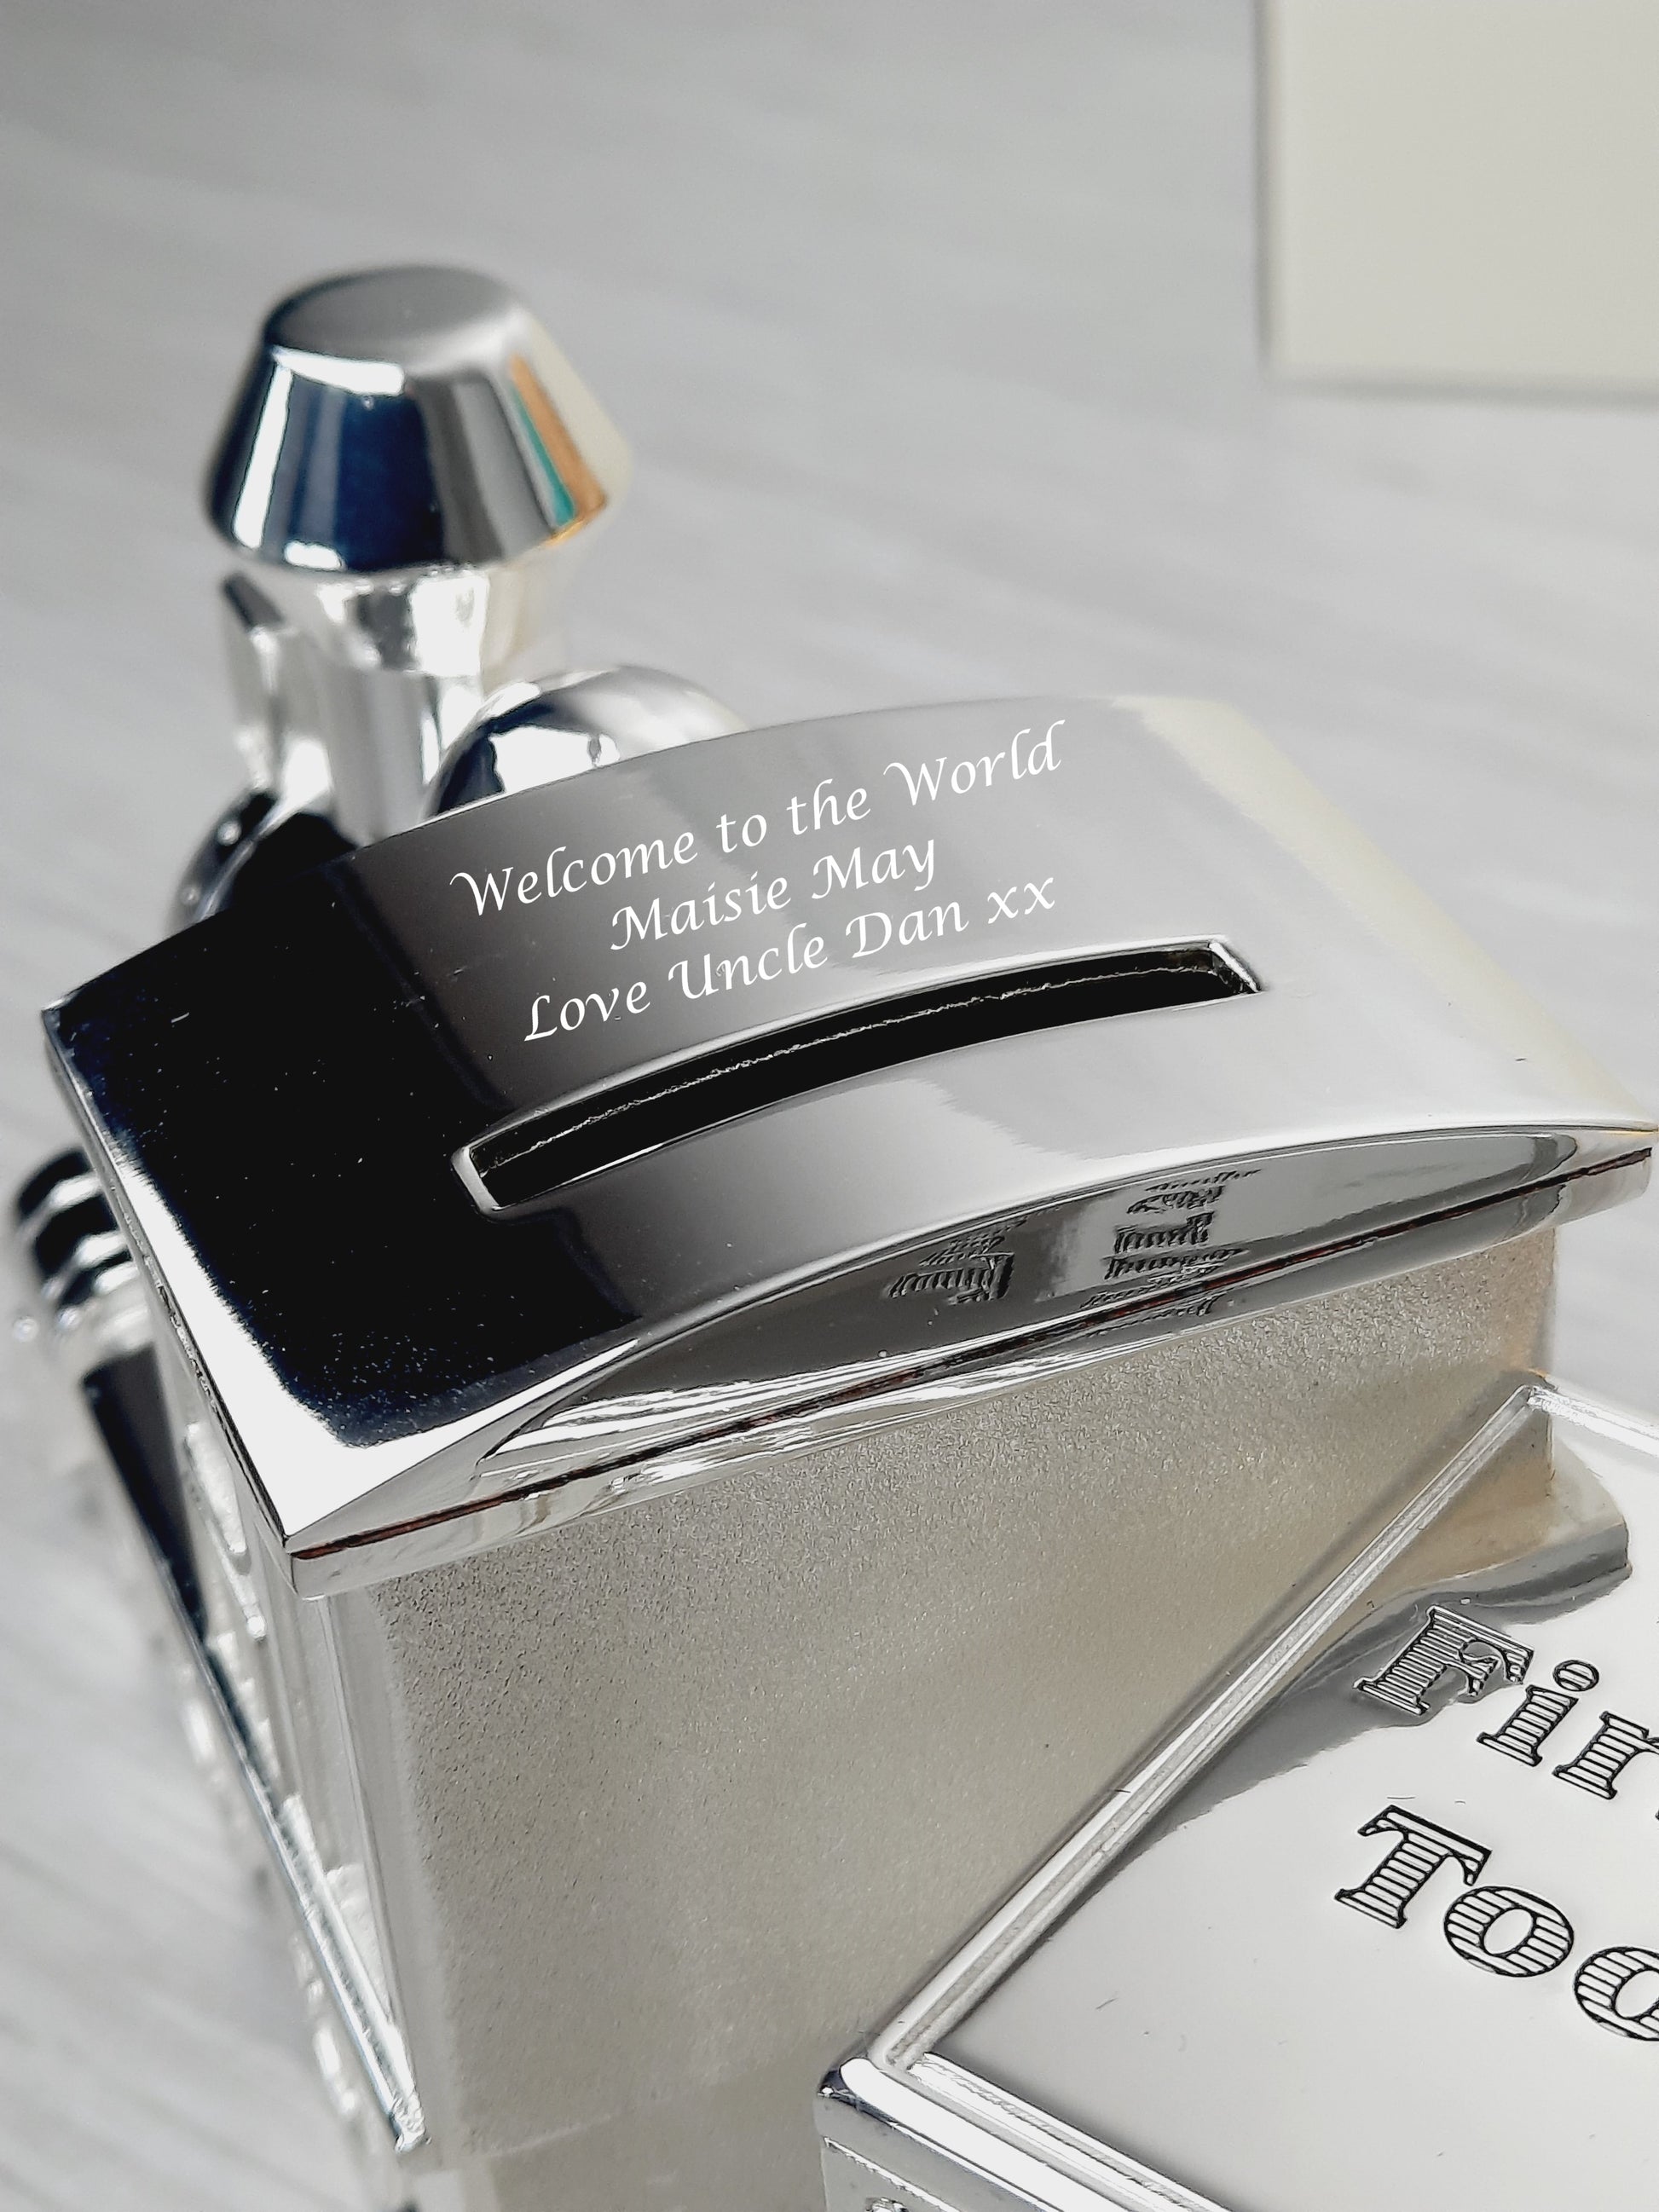 Personalised Engraved Money Box that says "Welcome to the World Maisie May Love Uncle Dan xx"